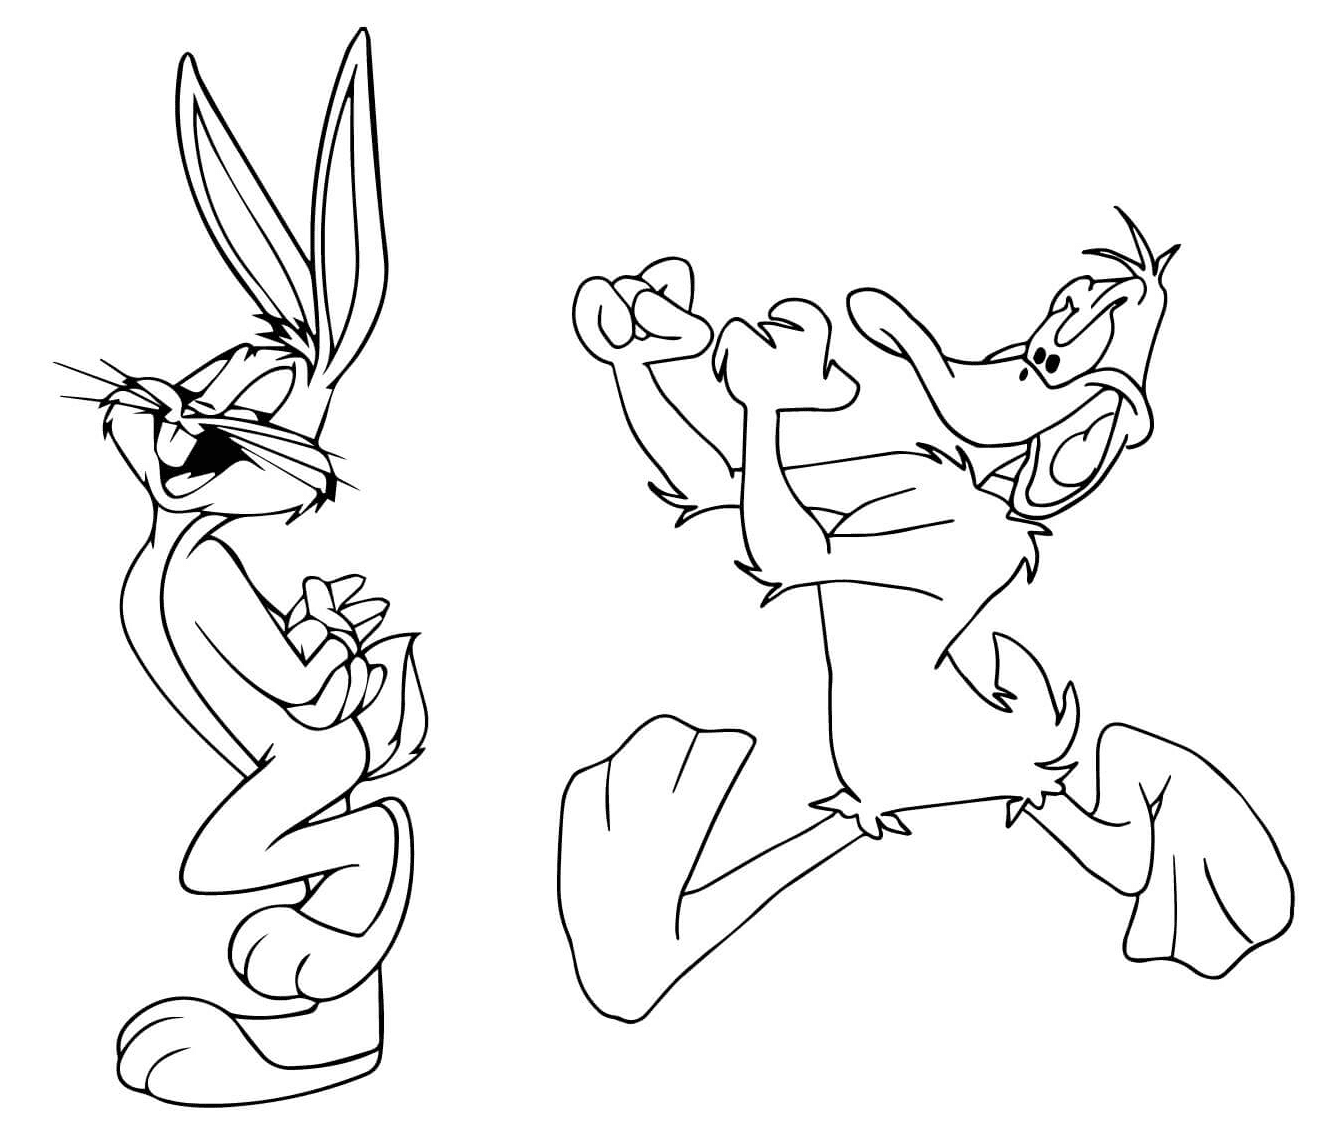 Daffy Duck Chasing Bugs Bunny Coloring Page